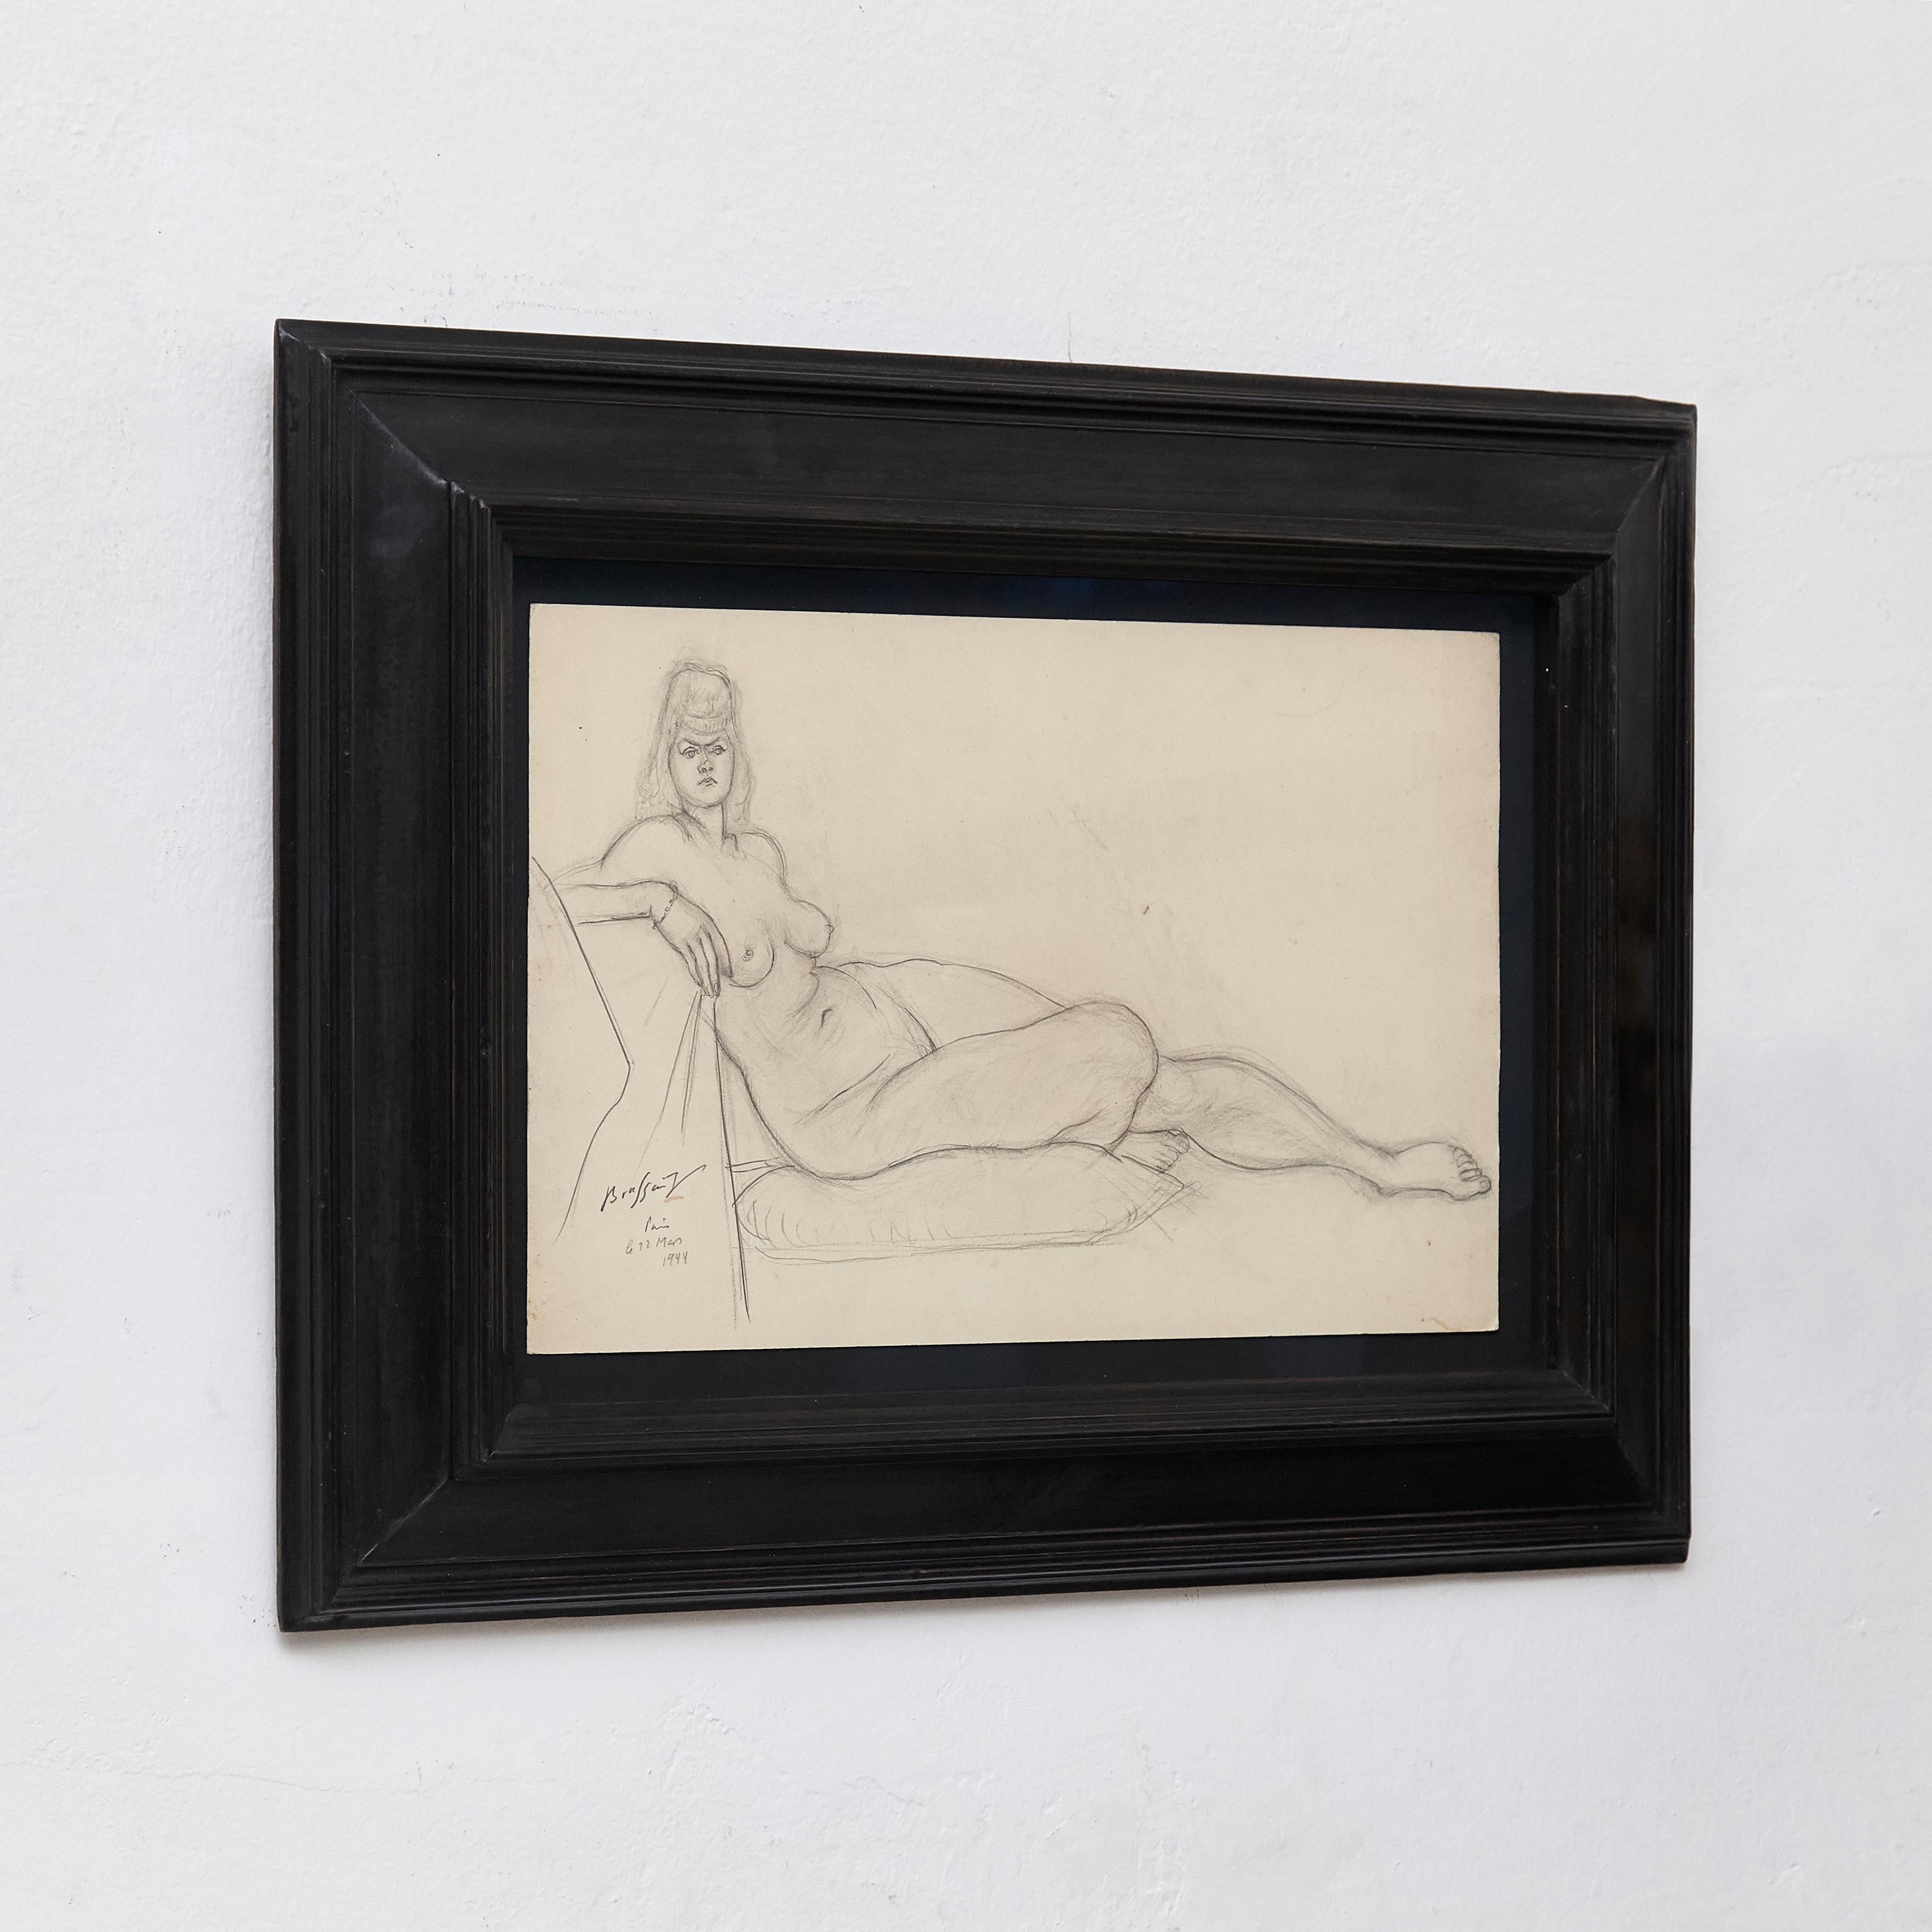 Signed drawing in pencil by Brassaï, 1944.

Framed on an antique frame with museum glass.

Brassaï pseudonym of Gyula Halász; (9 September 1899-8 July 1984) was a Hungarian, French photographer, sculptor, medalist, writer, and filmmaker who rose